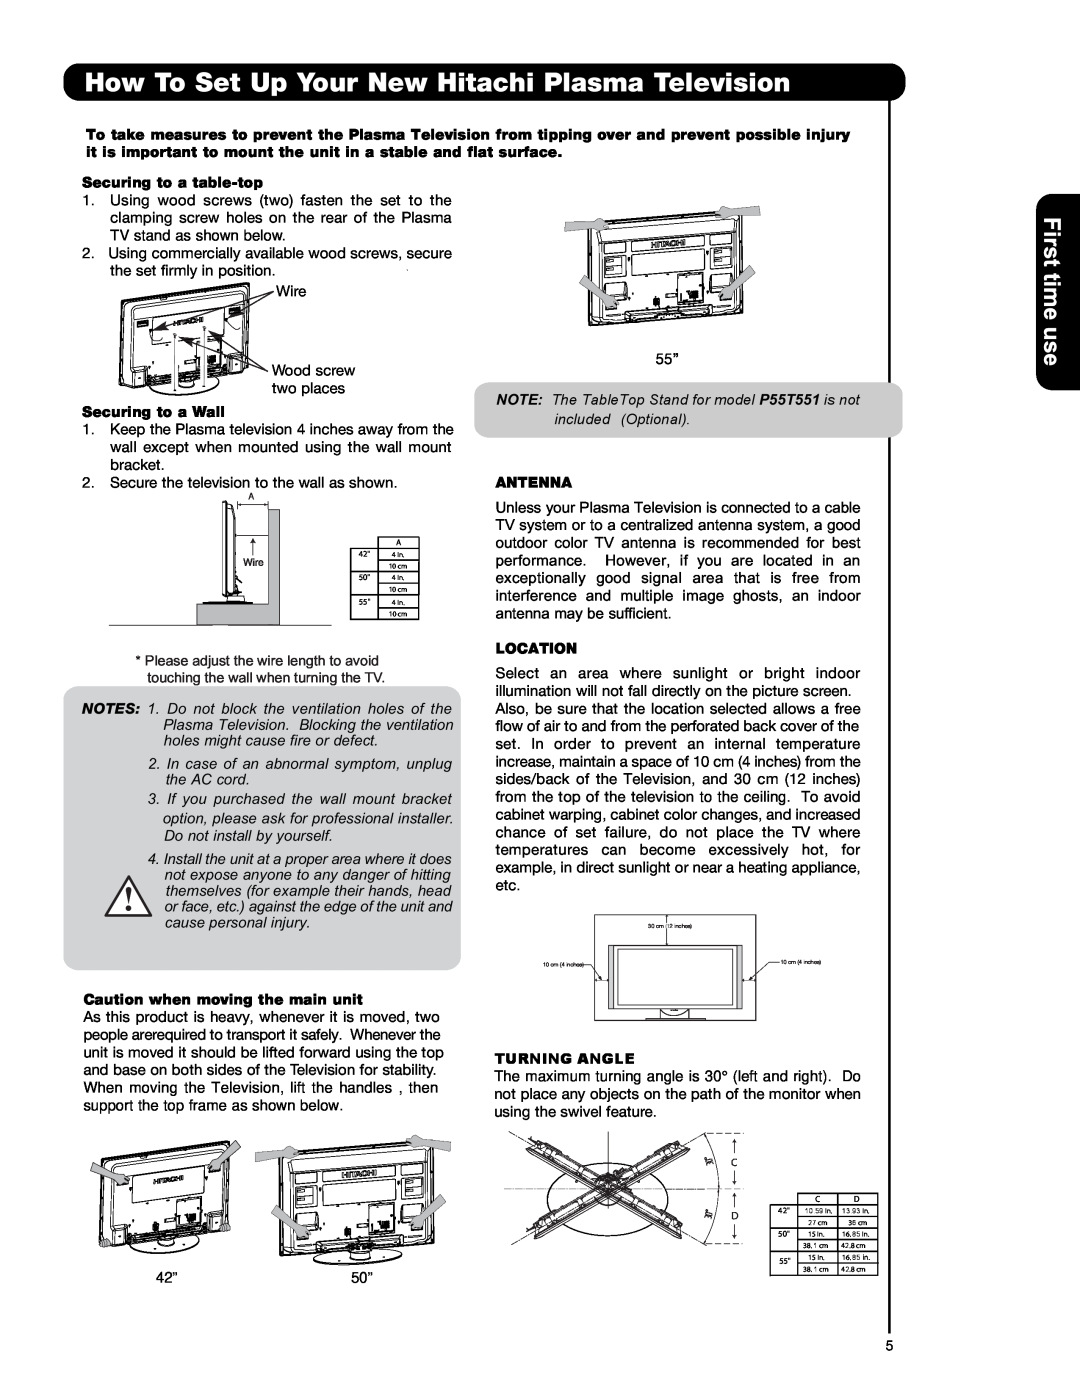 Hitachi P42T501 How To Set Up Your New Hitachi Plasma Television, First time use, Securing to a table-top, Antenna 